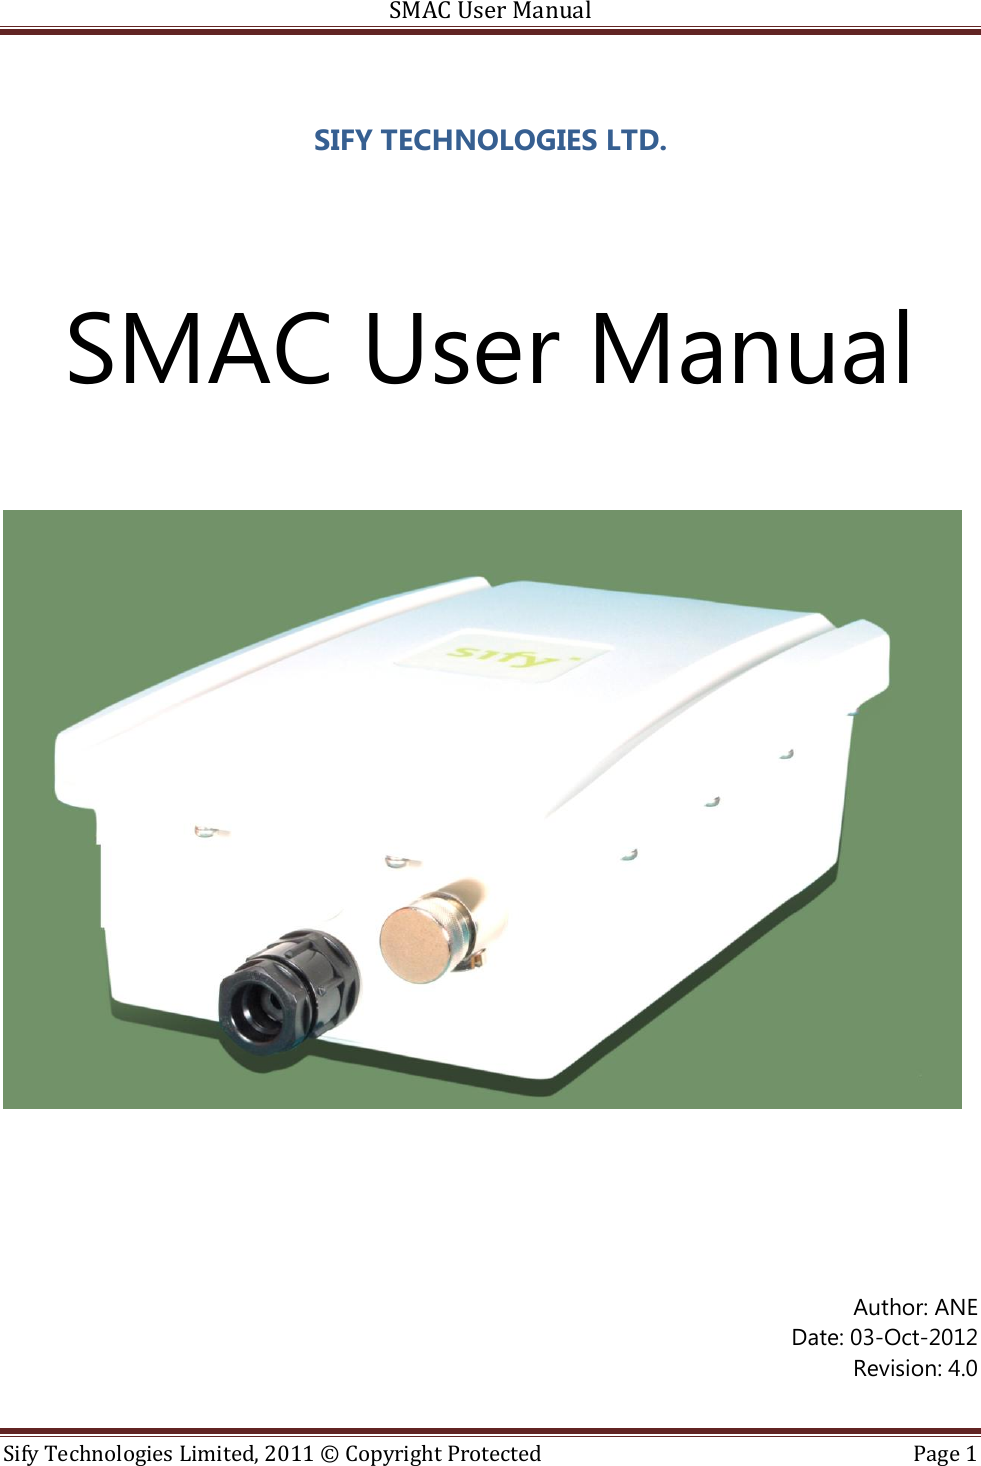 SMAC User Manual  Sify Technologies Limited, 2011 © Copyright Protected  Page 1  SIFY TECHNOLOGIES LTD.   SMAC User Manual          Author: ANE Date: 03-Oct-2012 Revision: 4.0   